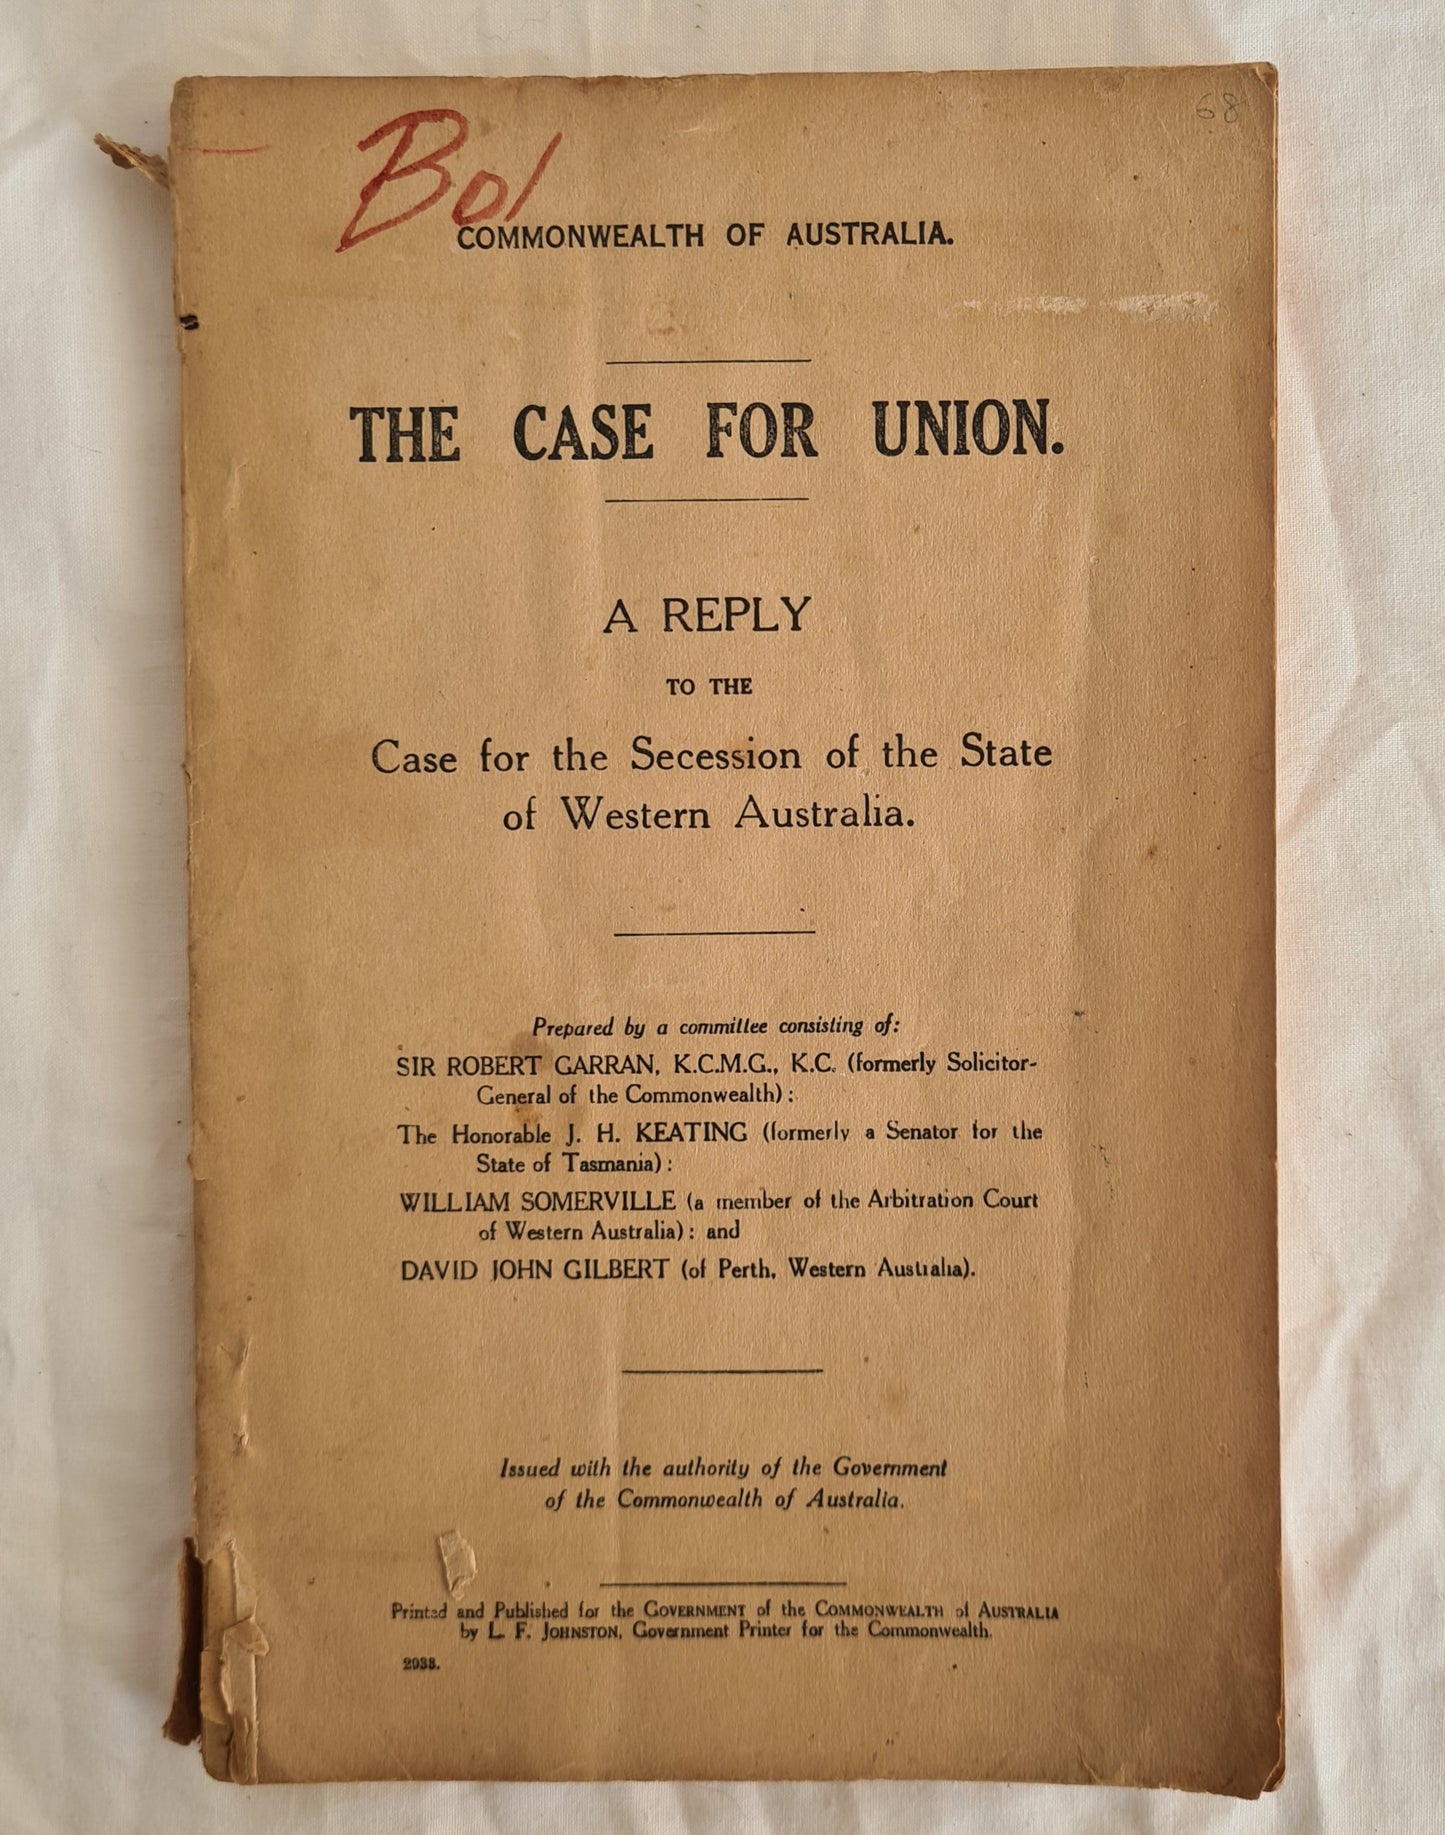 The Case for Union  A Reply to the Case for the Secession of the State of Western Australia  by Sir Robert Garran, J. H. Keating, William Somerville and David John Gilbert